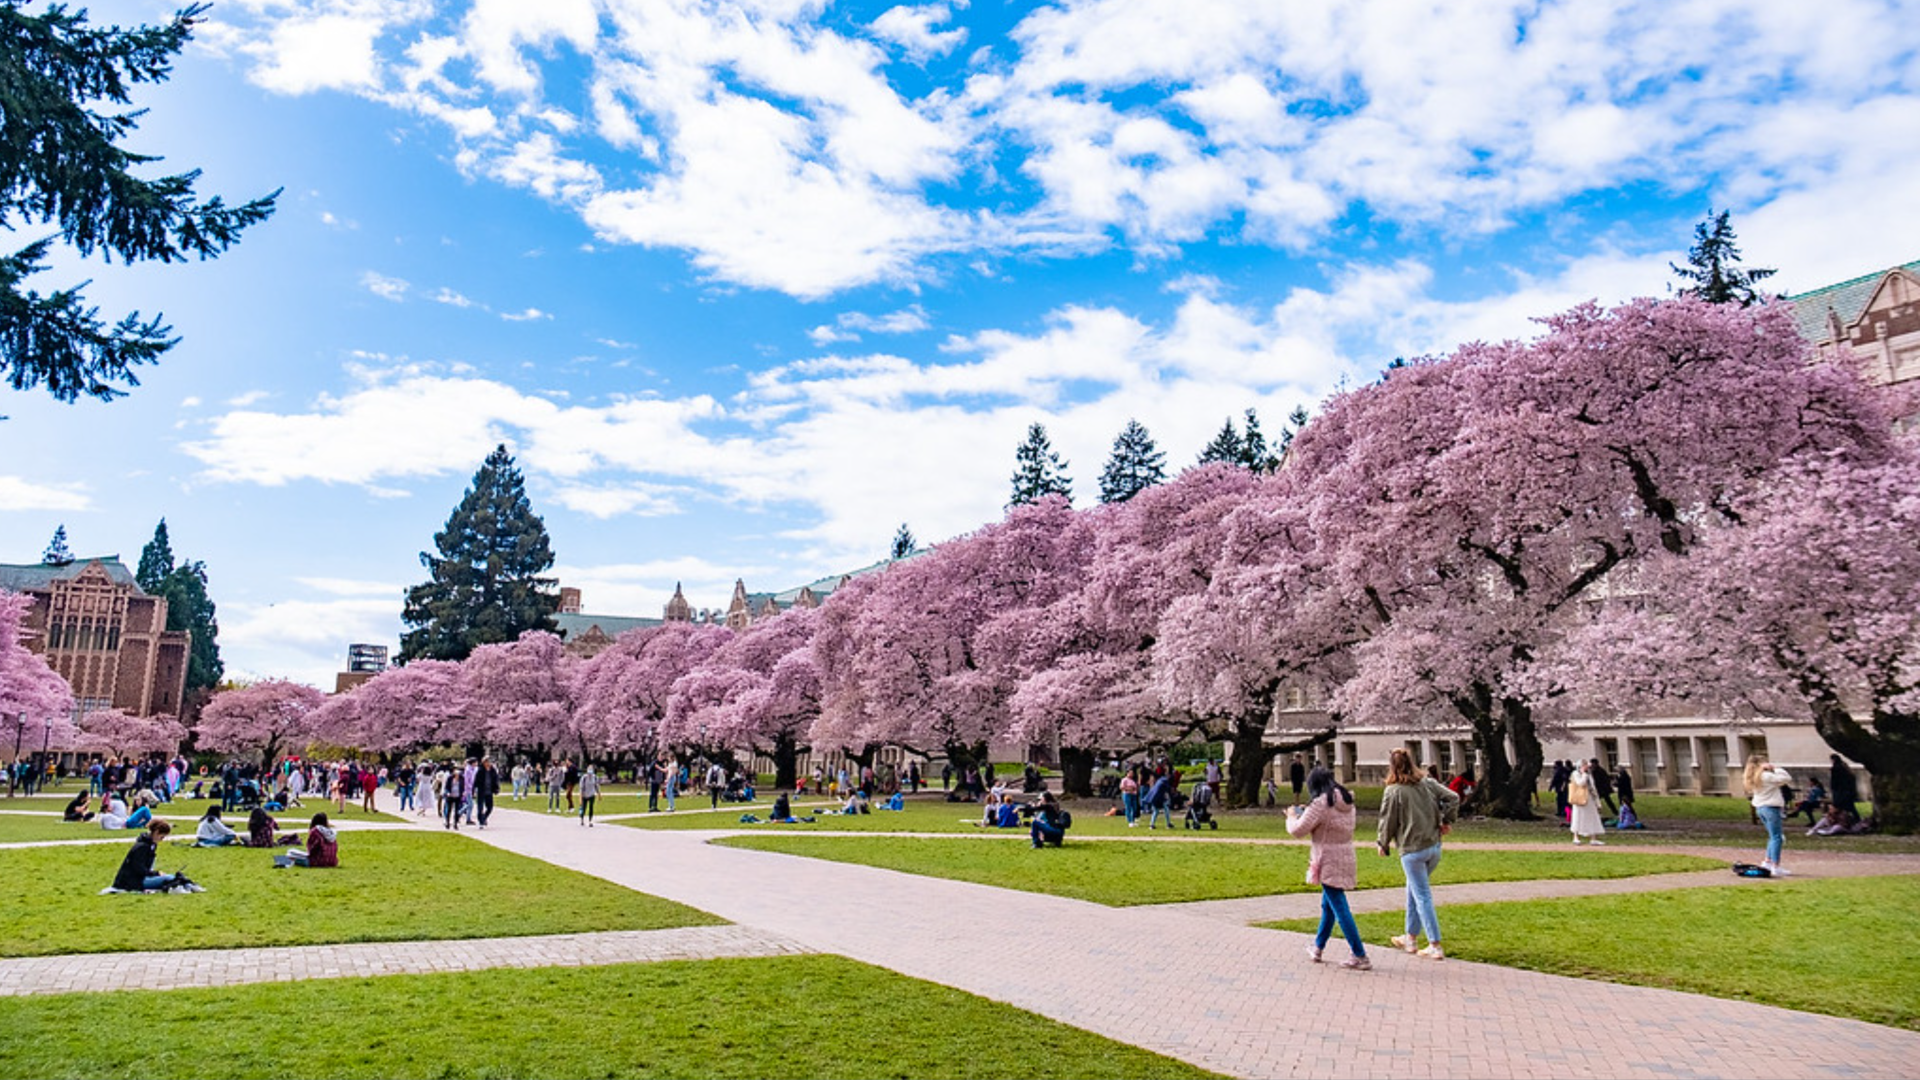 University of Washington ranks among most beautiful college campuses - Axios Seattle